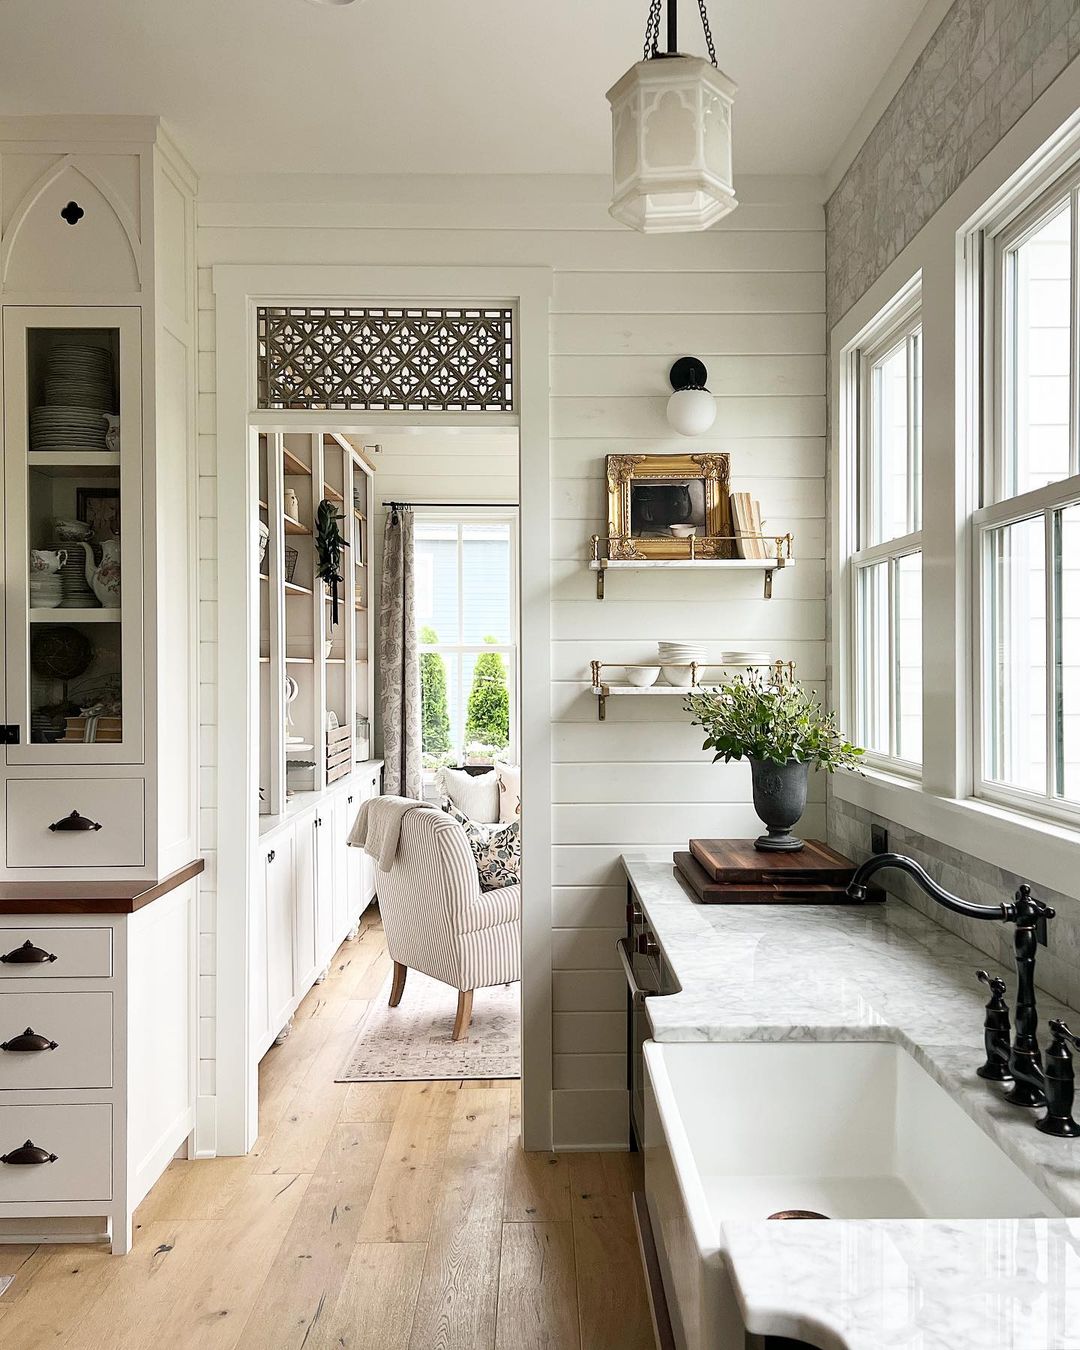 Charming Wood and White Kitchens: Sunday Strolls + Scrolls